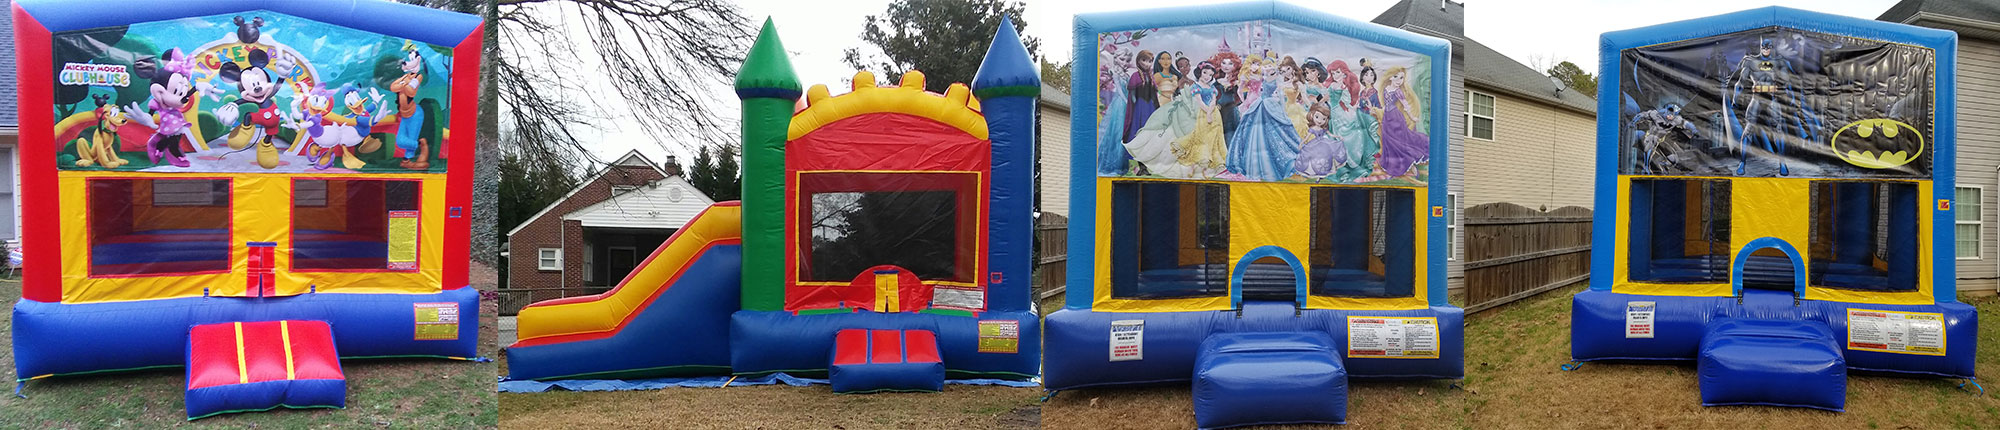 Inflatables Bounce Houses